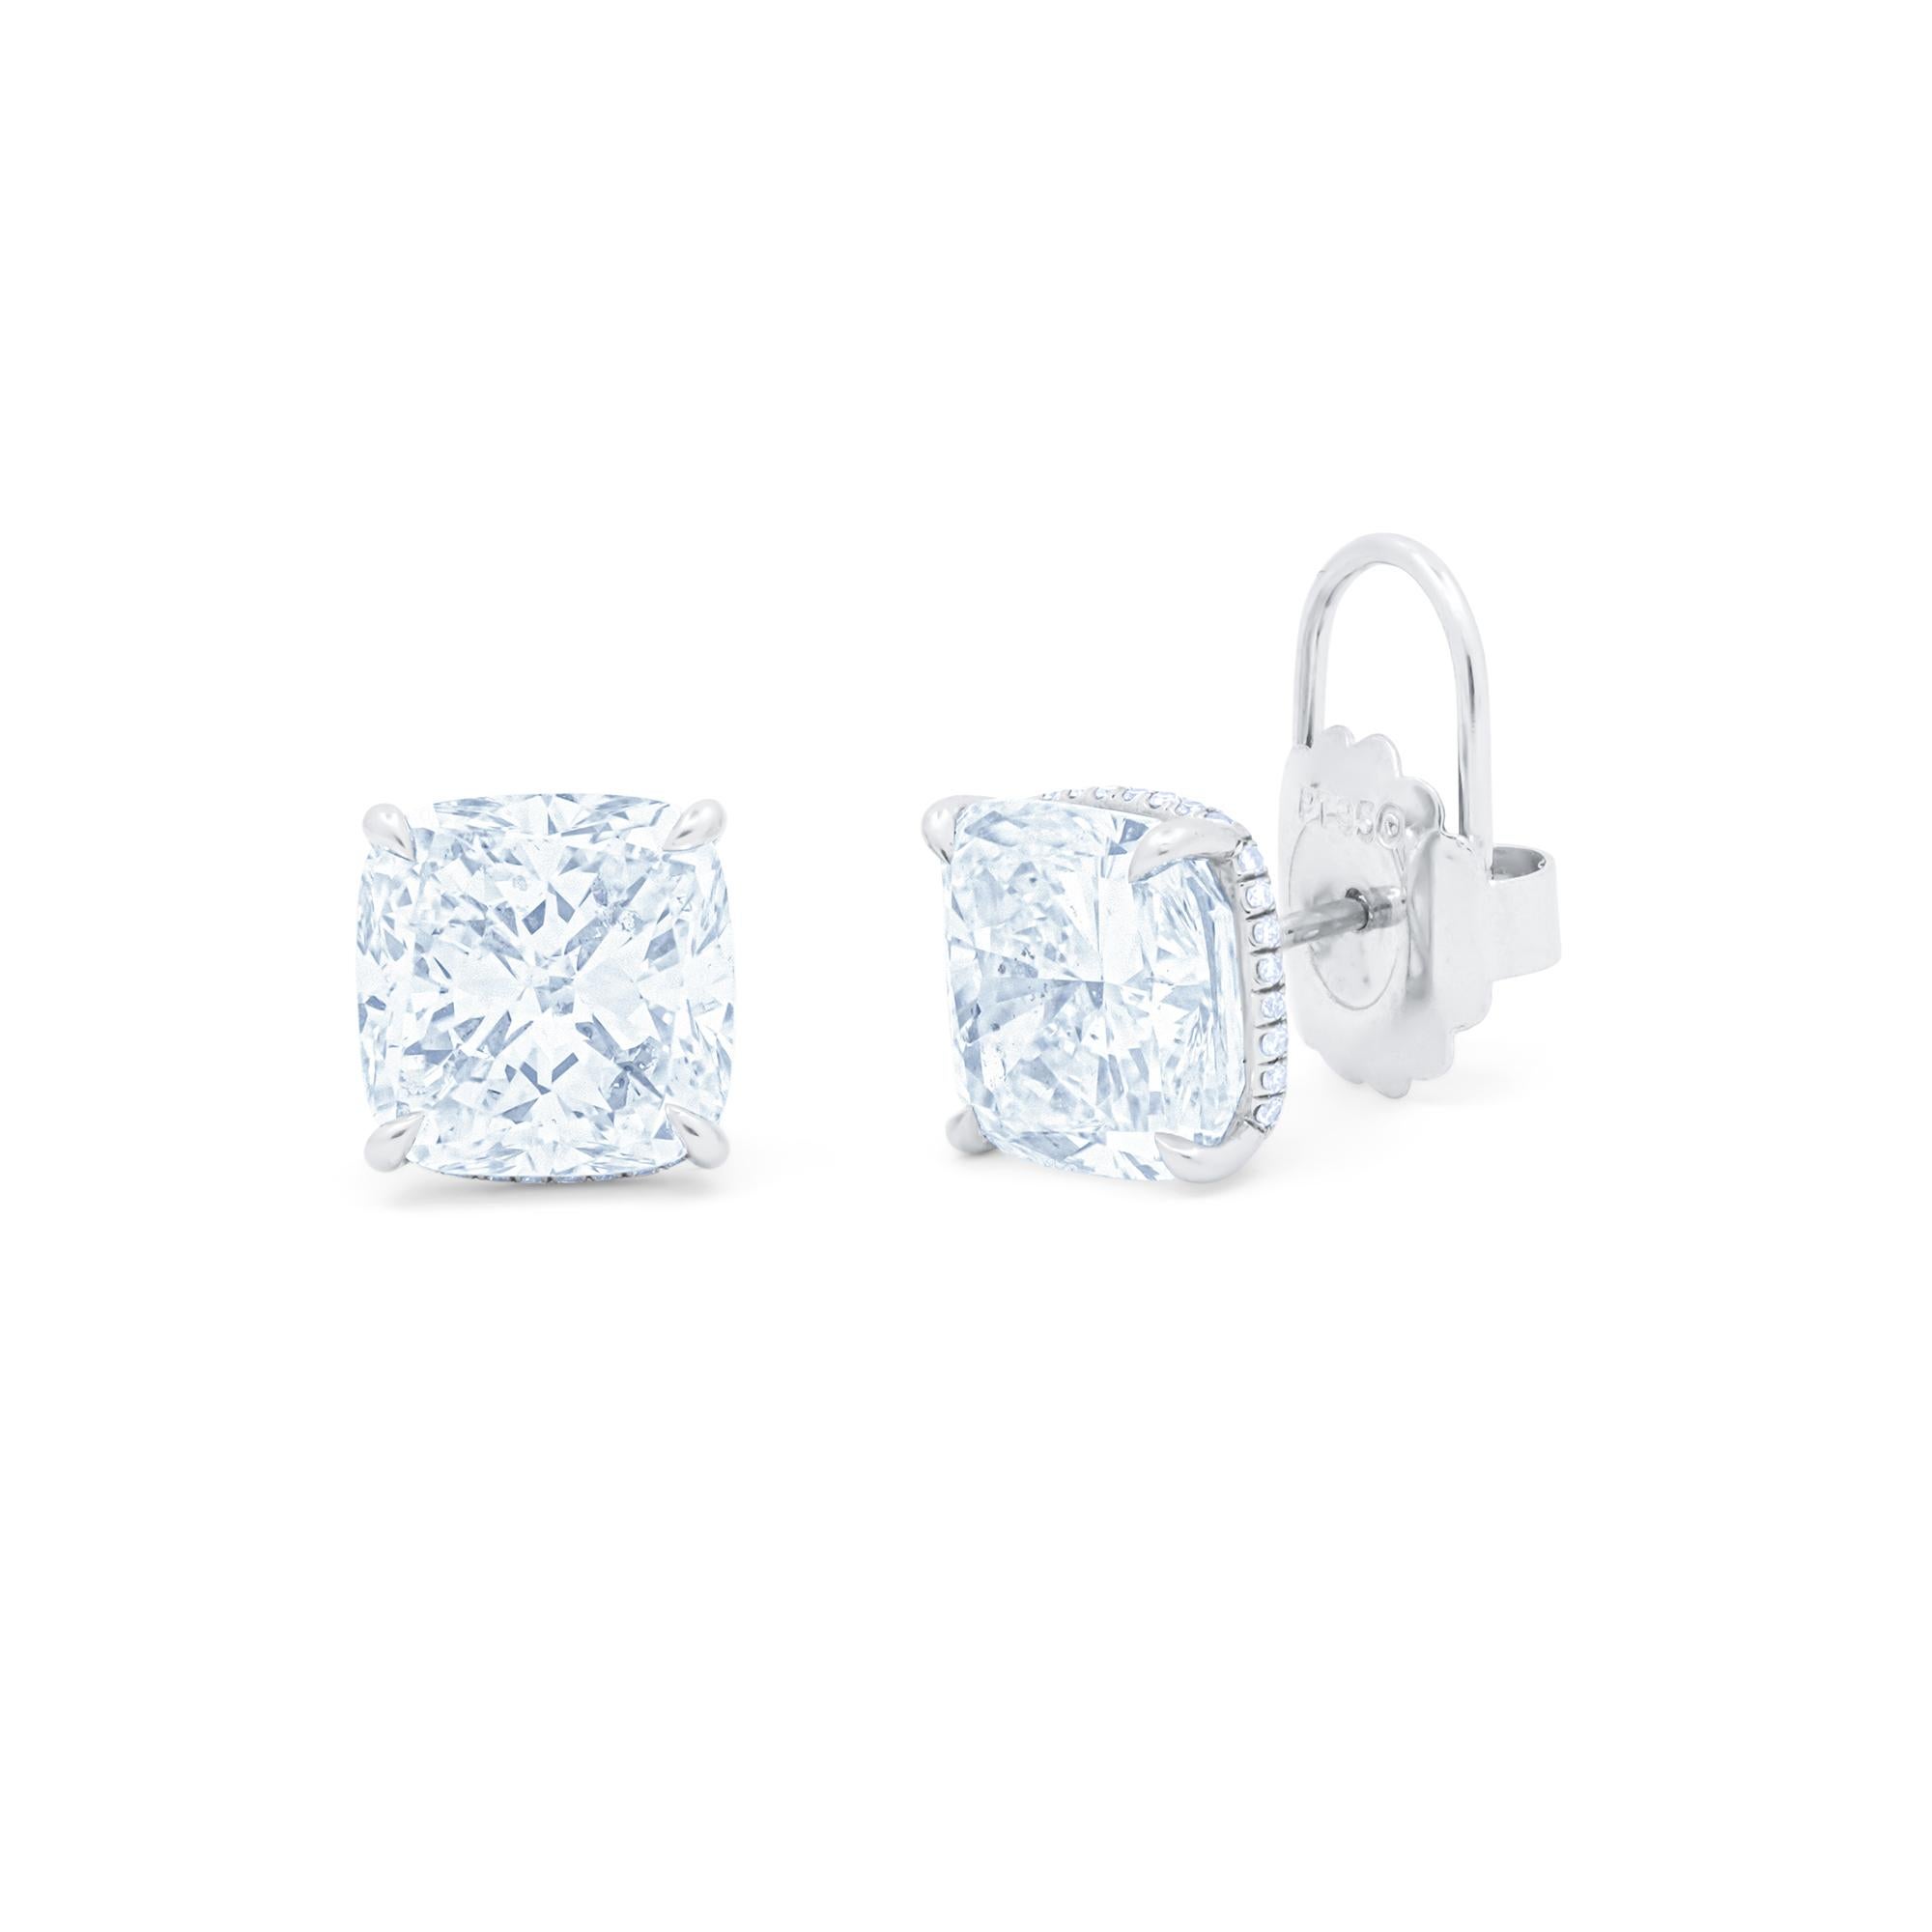 Cushion Cut Diana M.Cushions Total 10.53cts H VS2-SI1 GIA certifed Matching Studs  For Sale